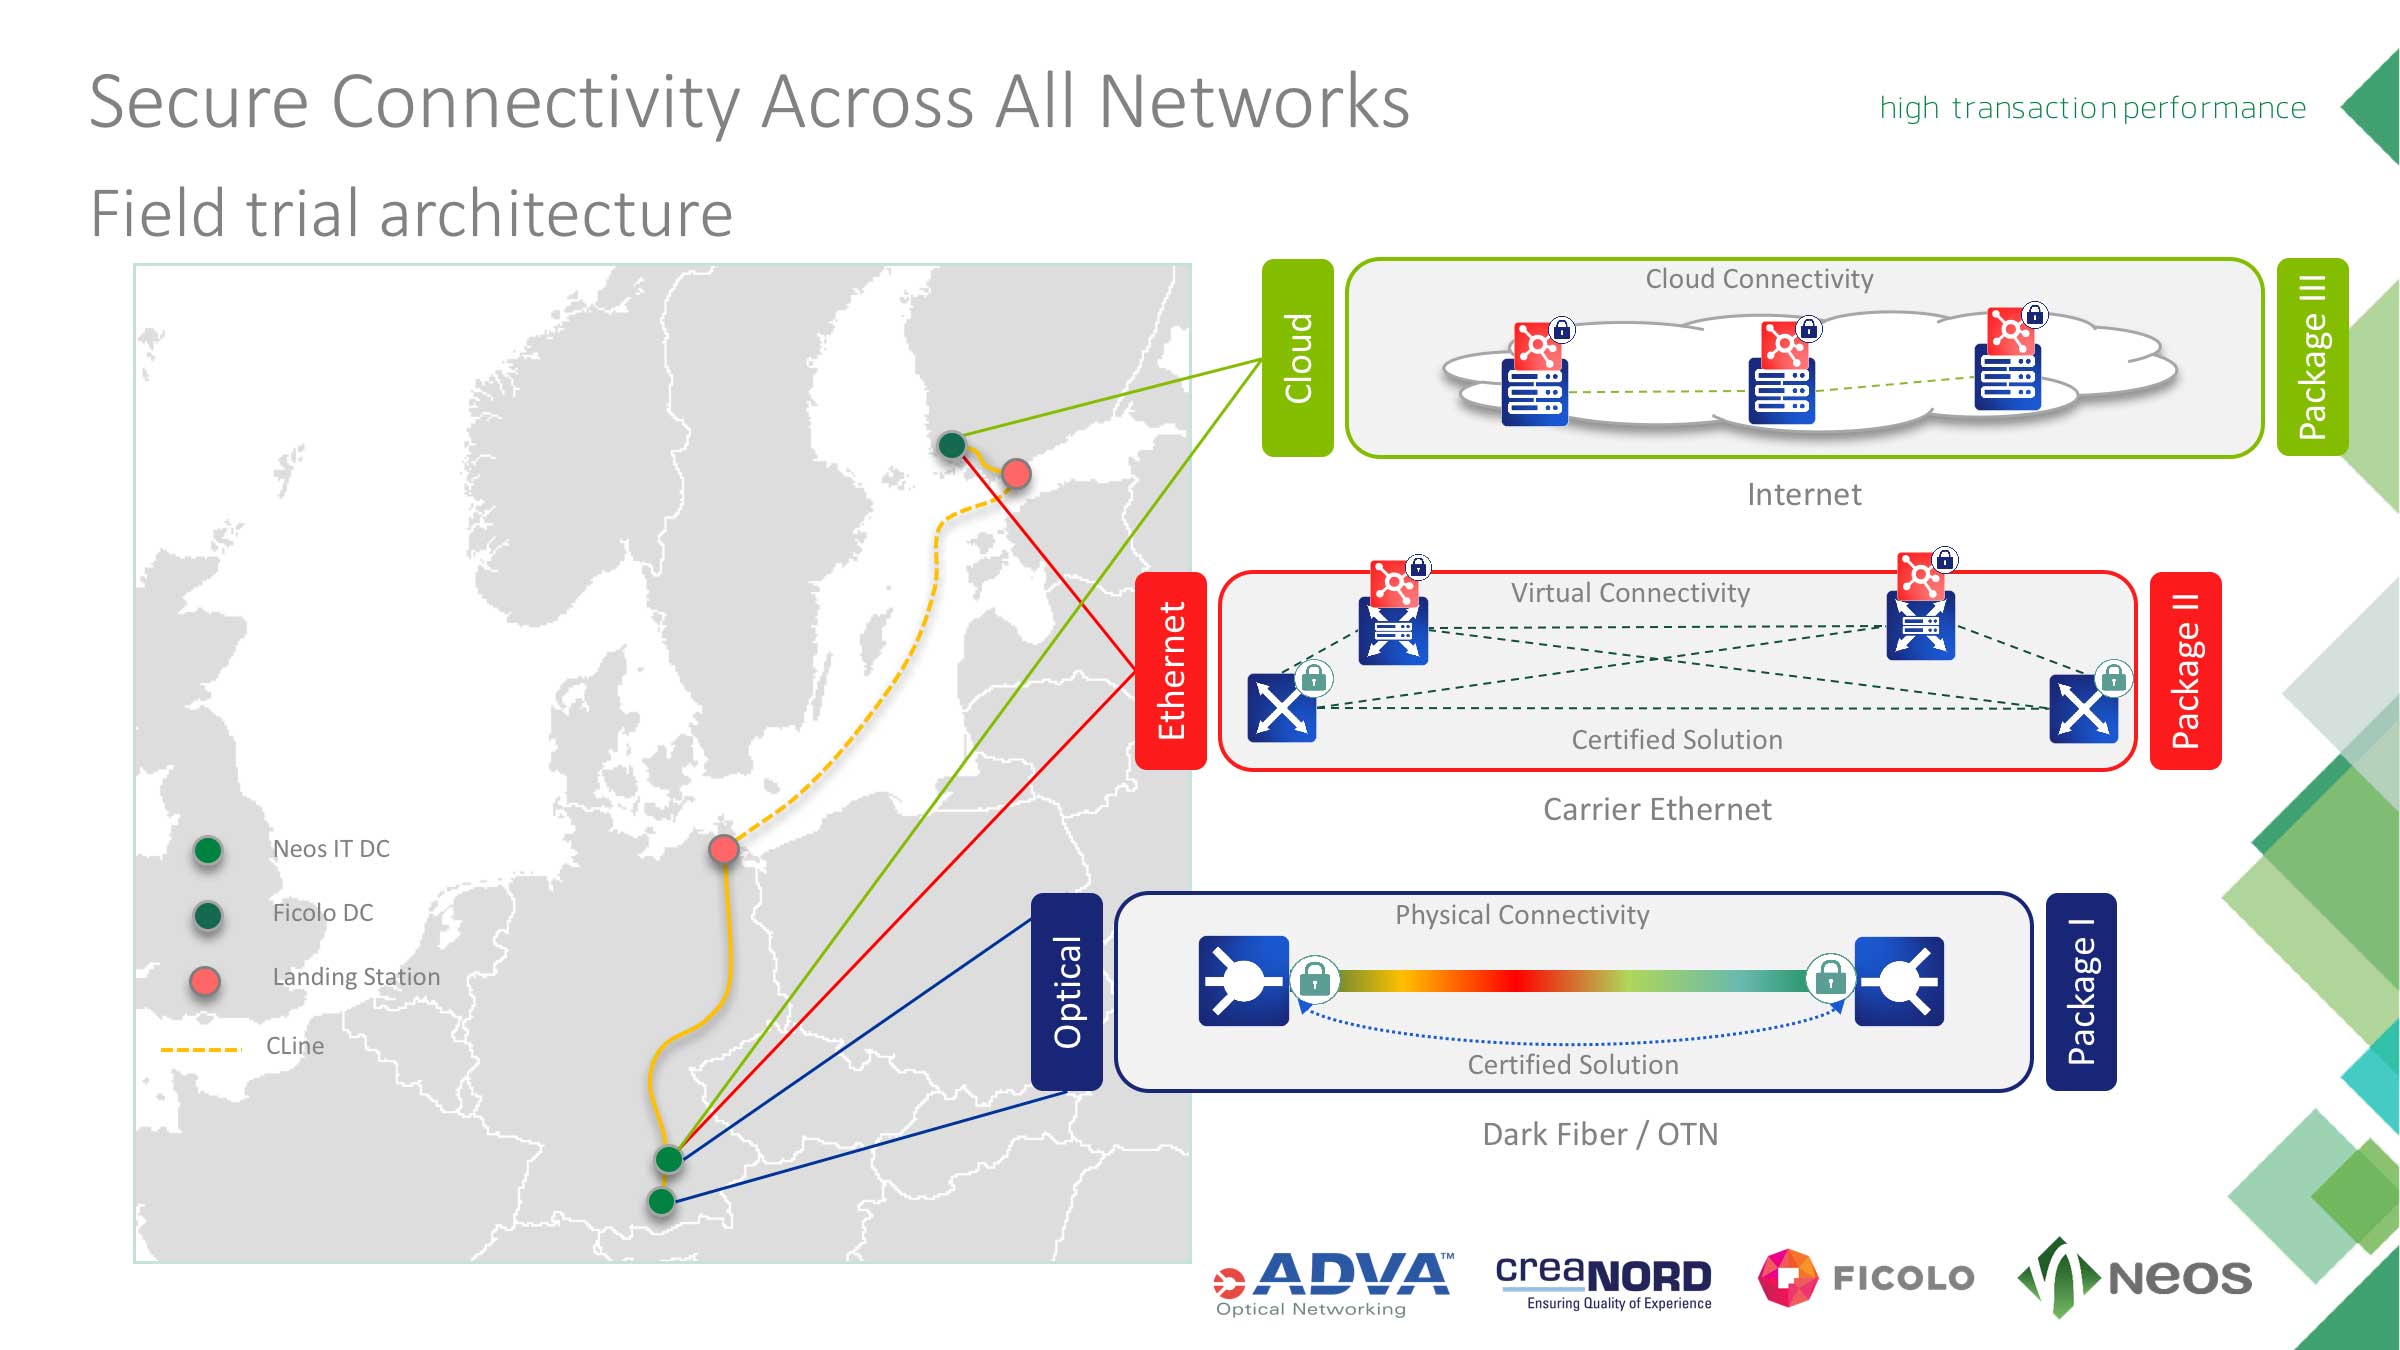 Neos IT Services Powerpoint Chart, Secure Connectivity Across All Networks